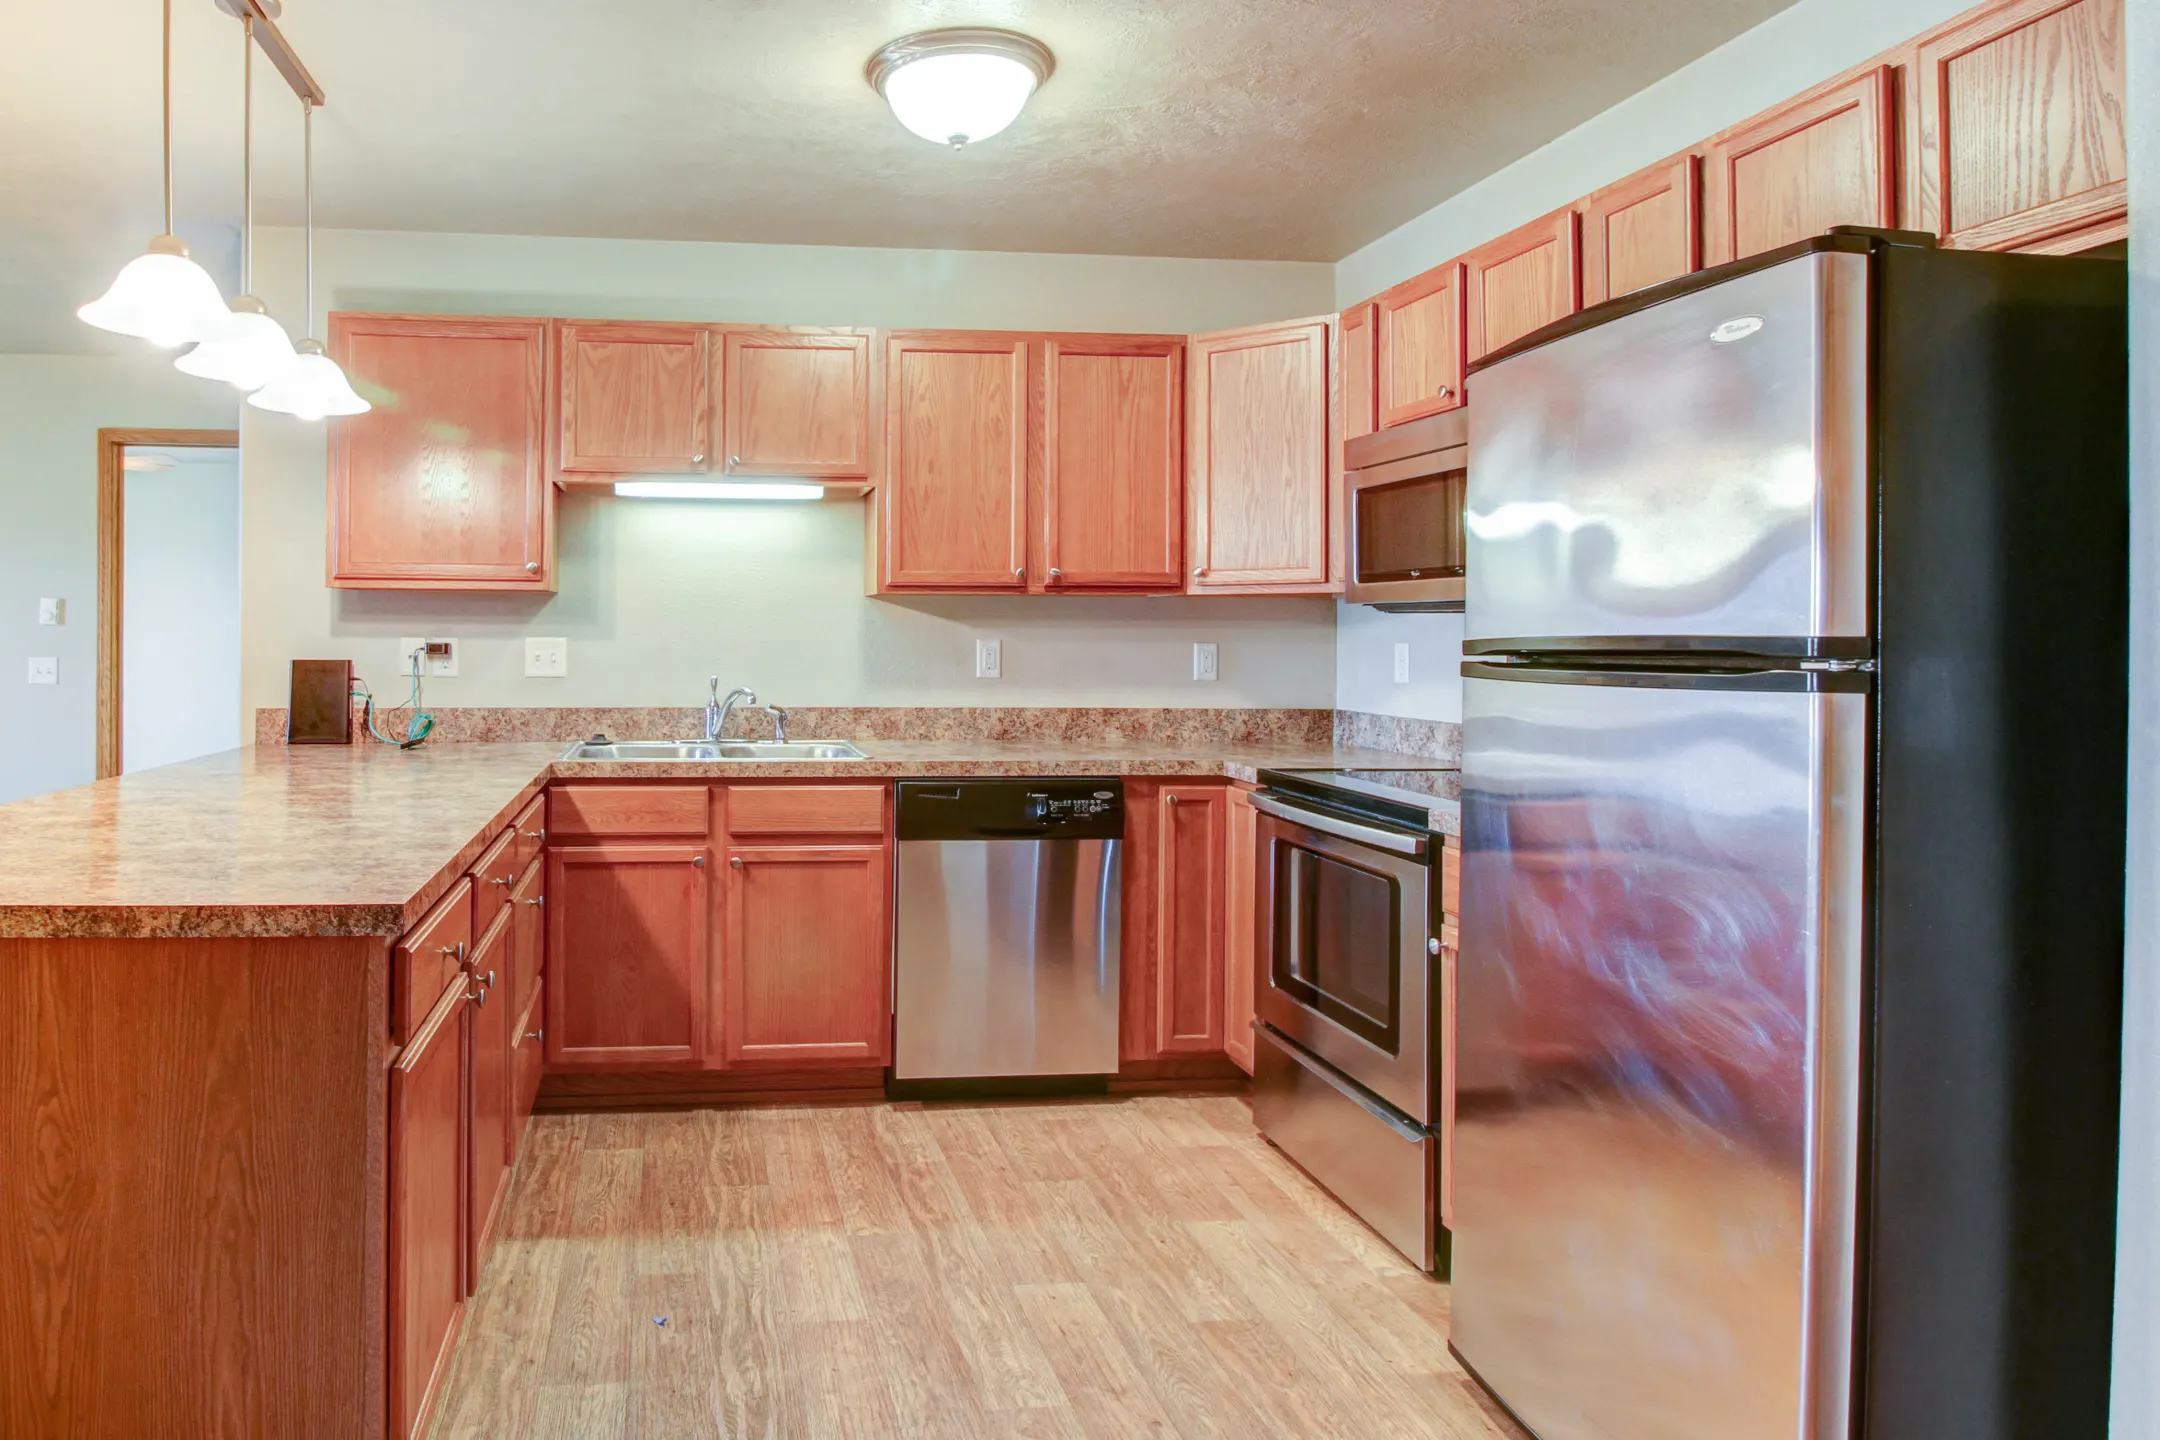 Kitchen - Northdale Apartments - Minot, ND